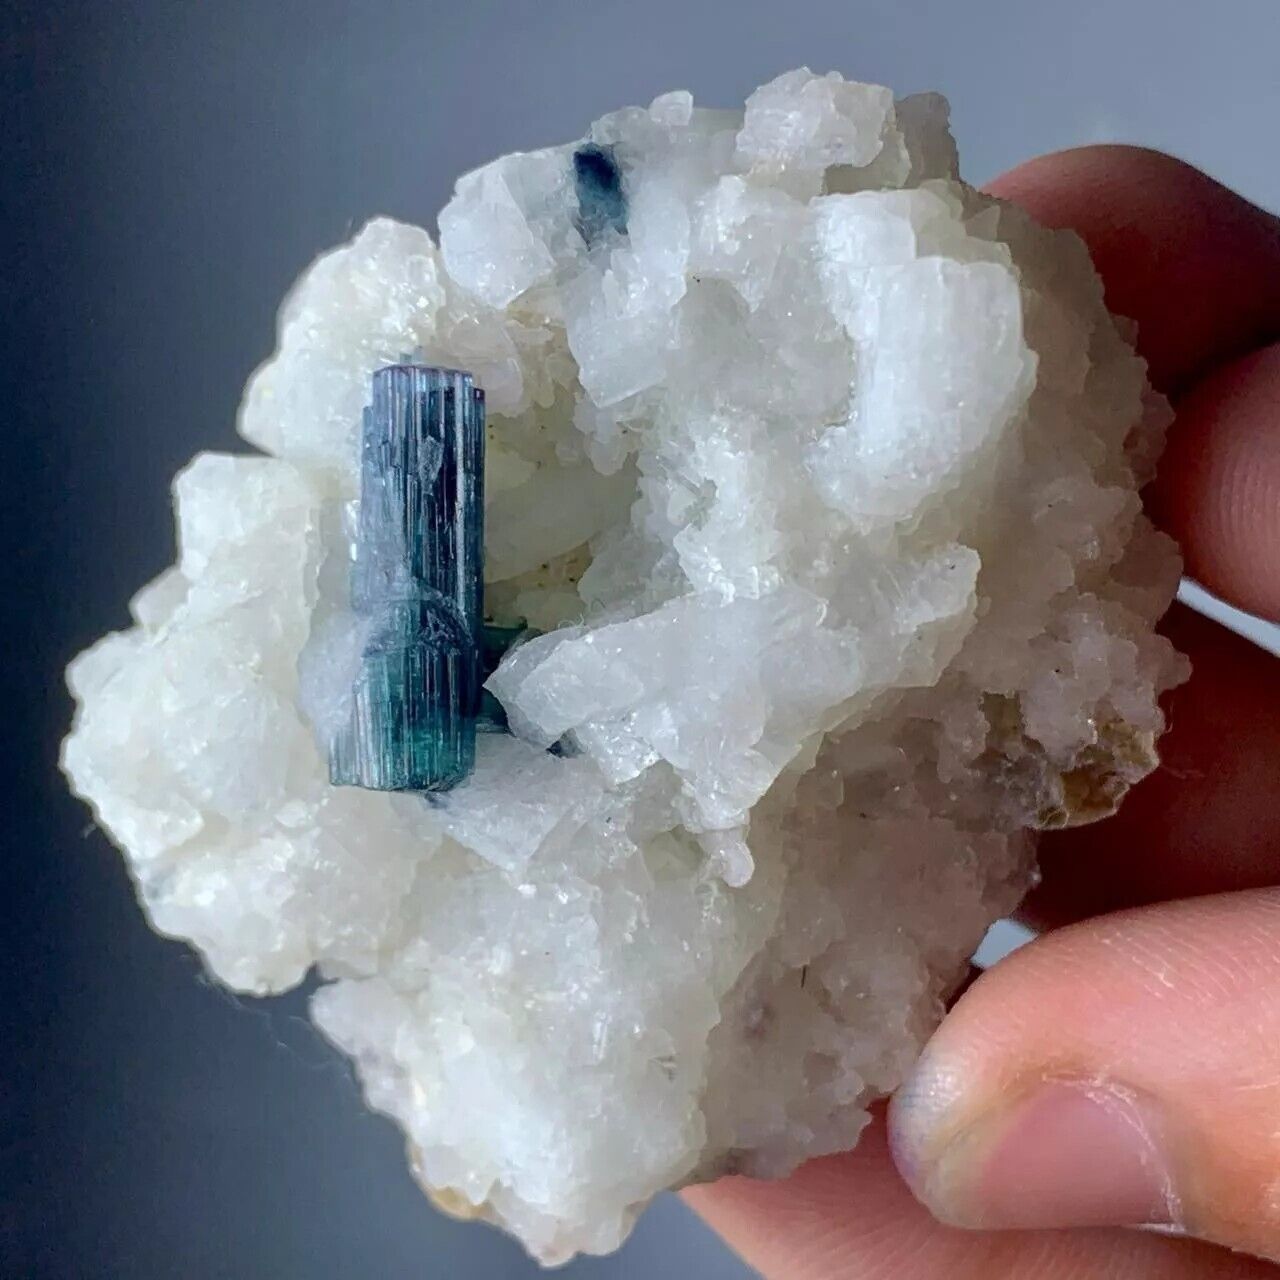 210 Cts Indicolite Tourmaline Crystal Specimen from Afghanistan